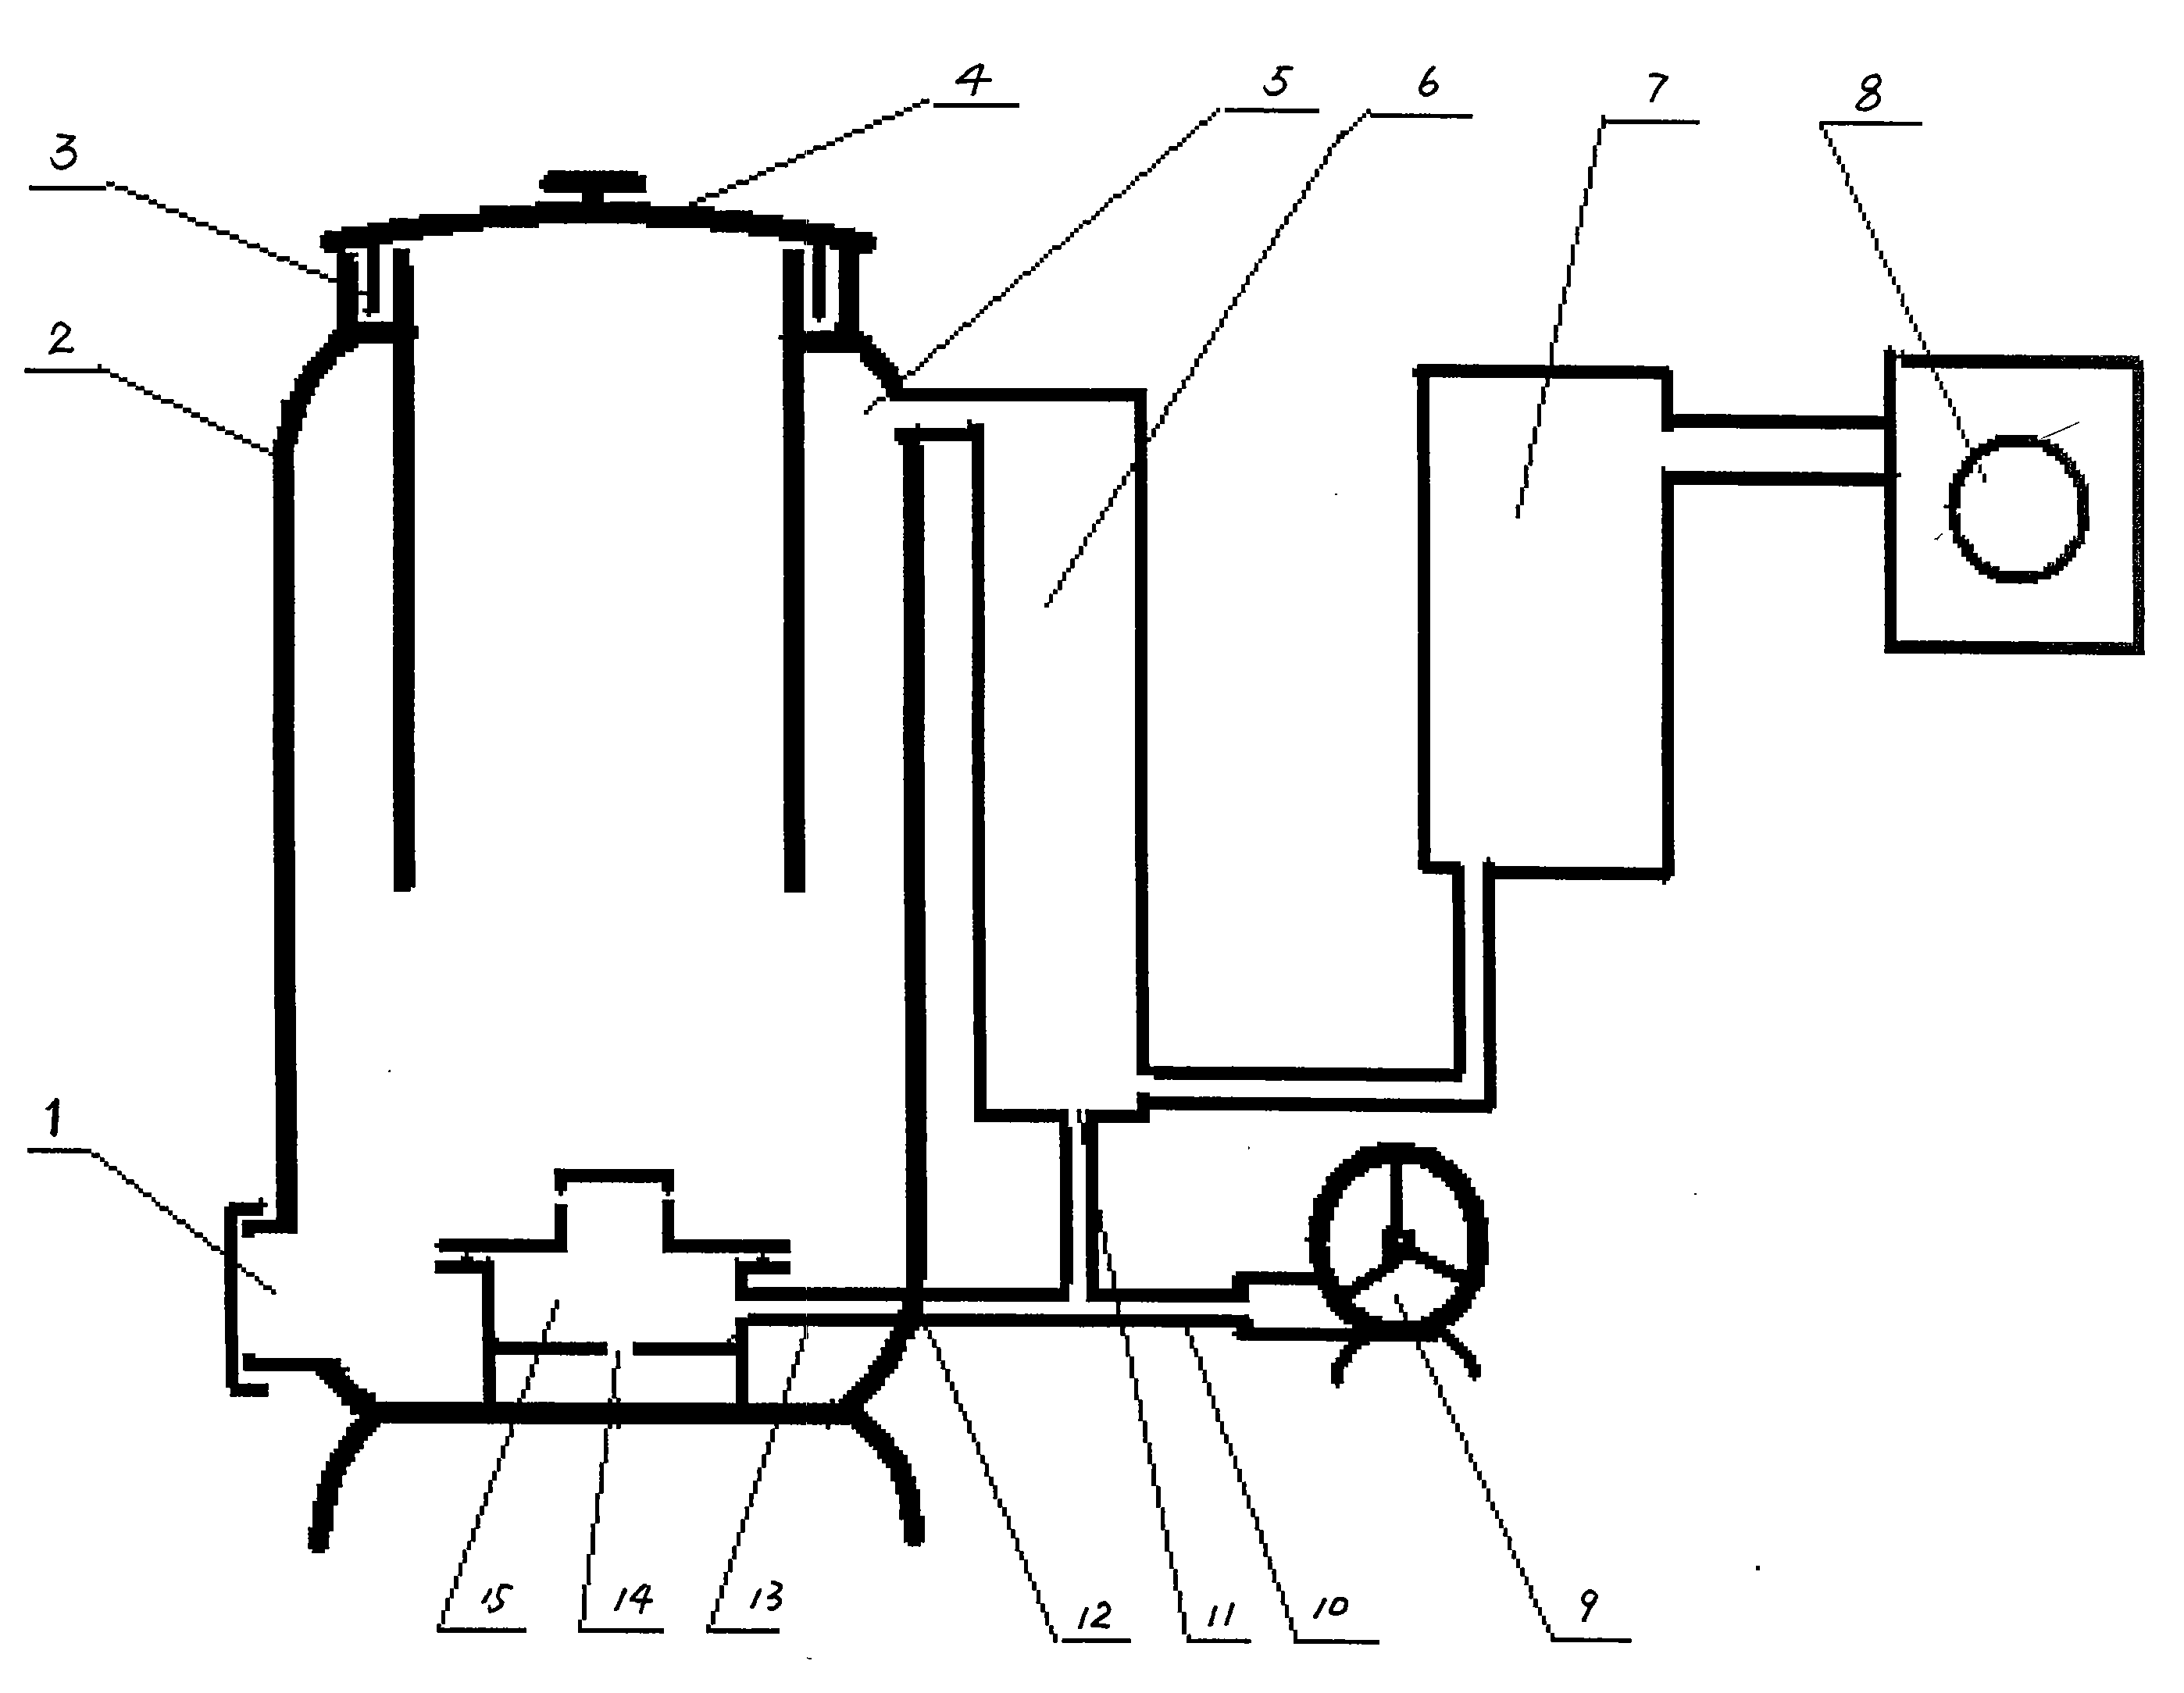 Gasifier for refluxing and pyrolyzing tar